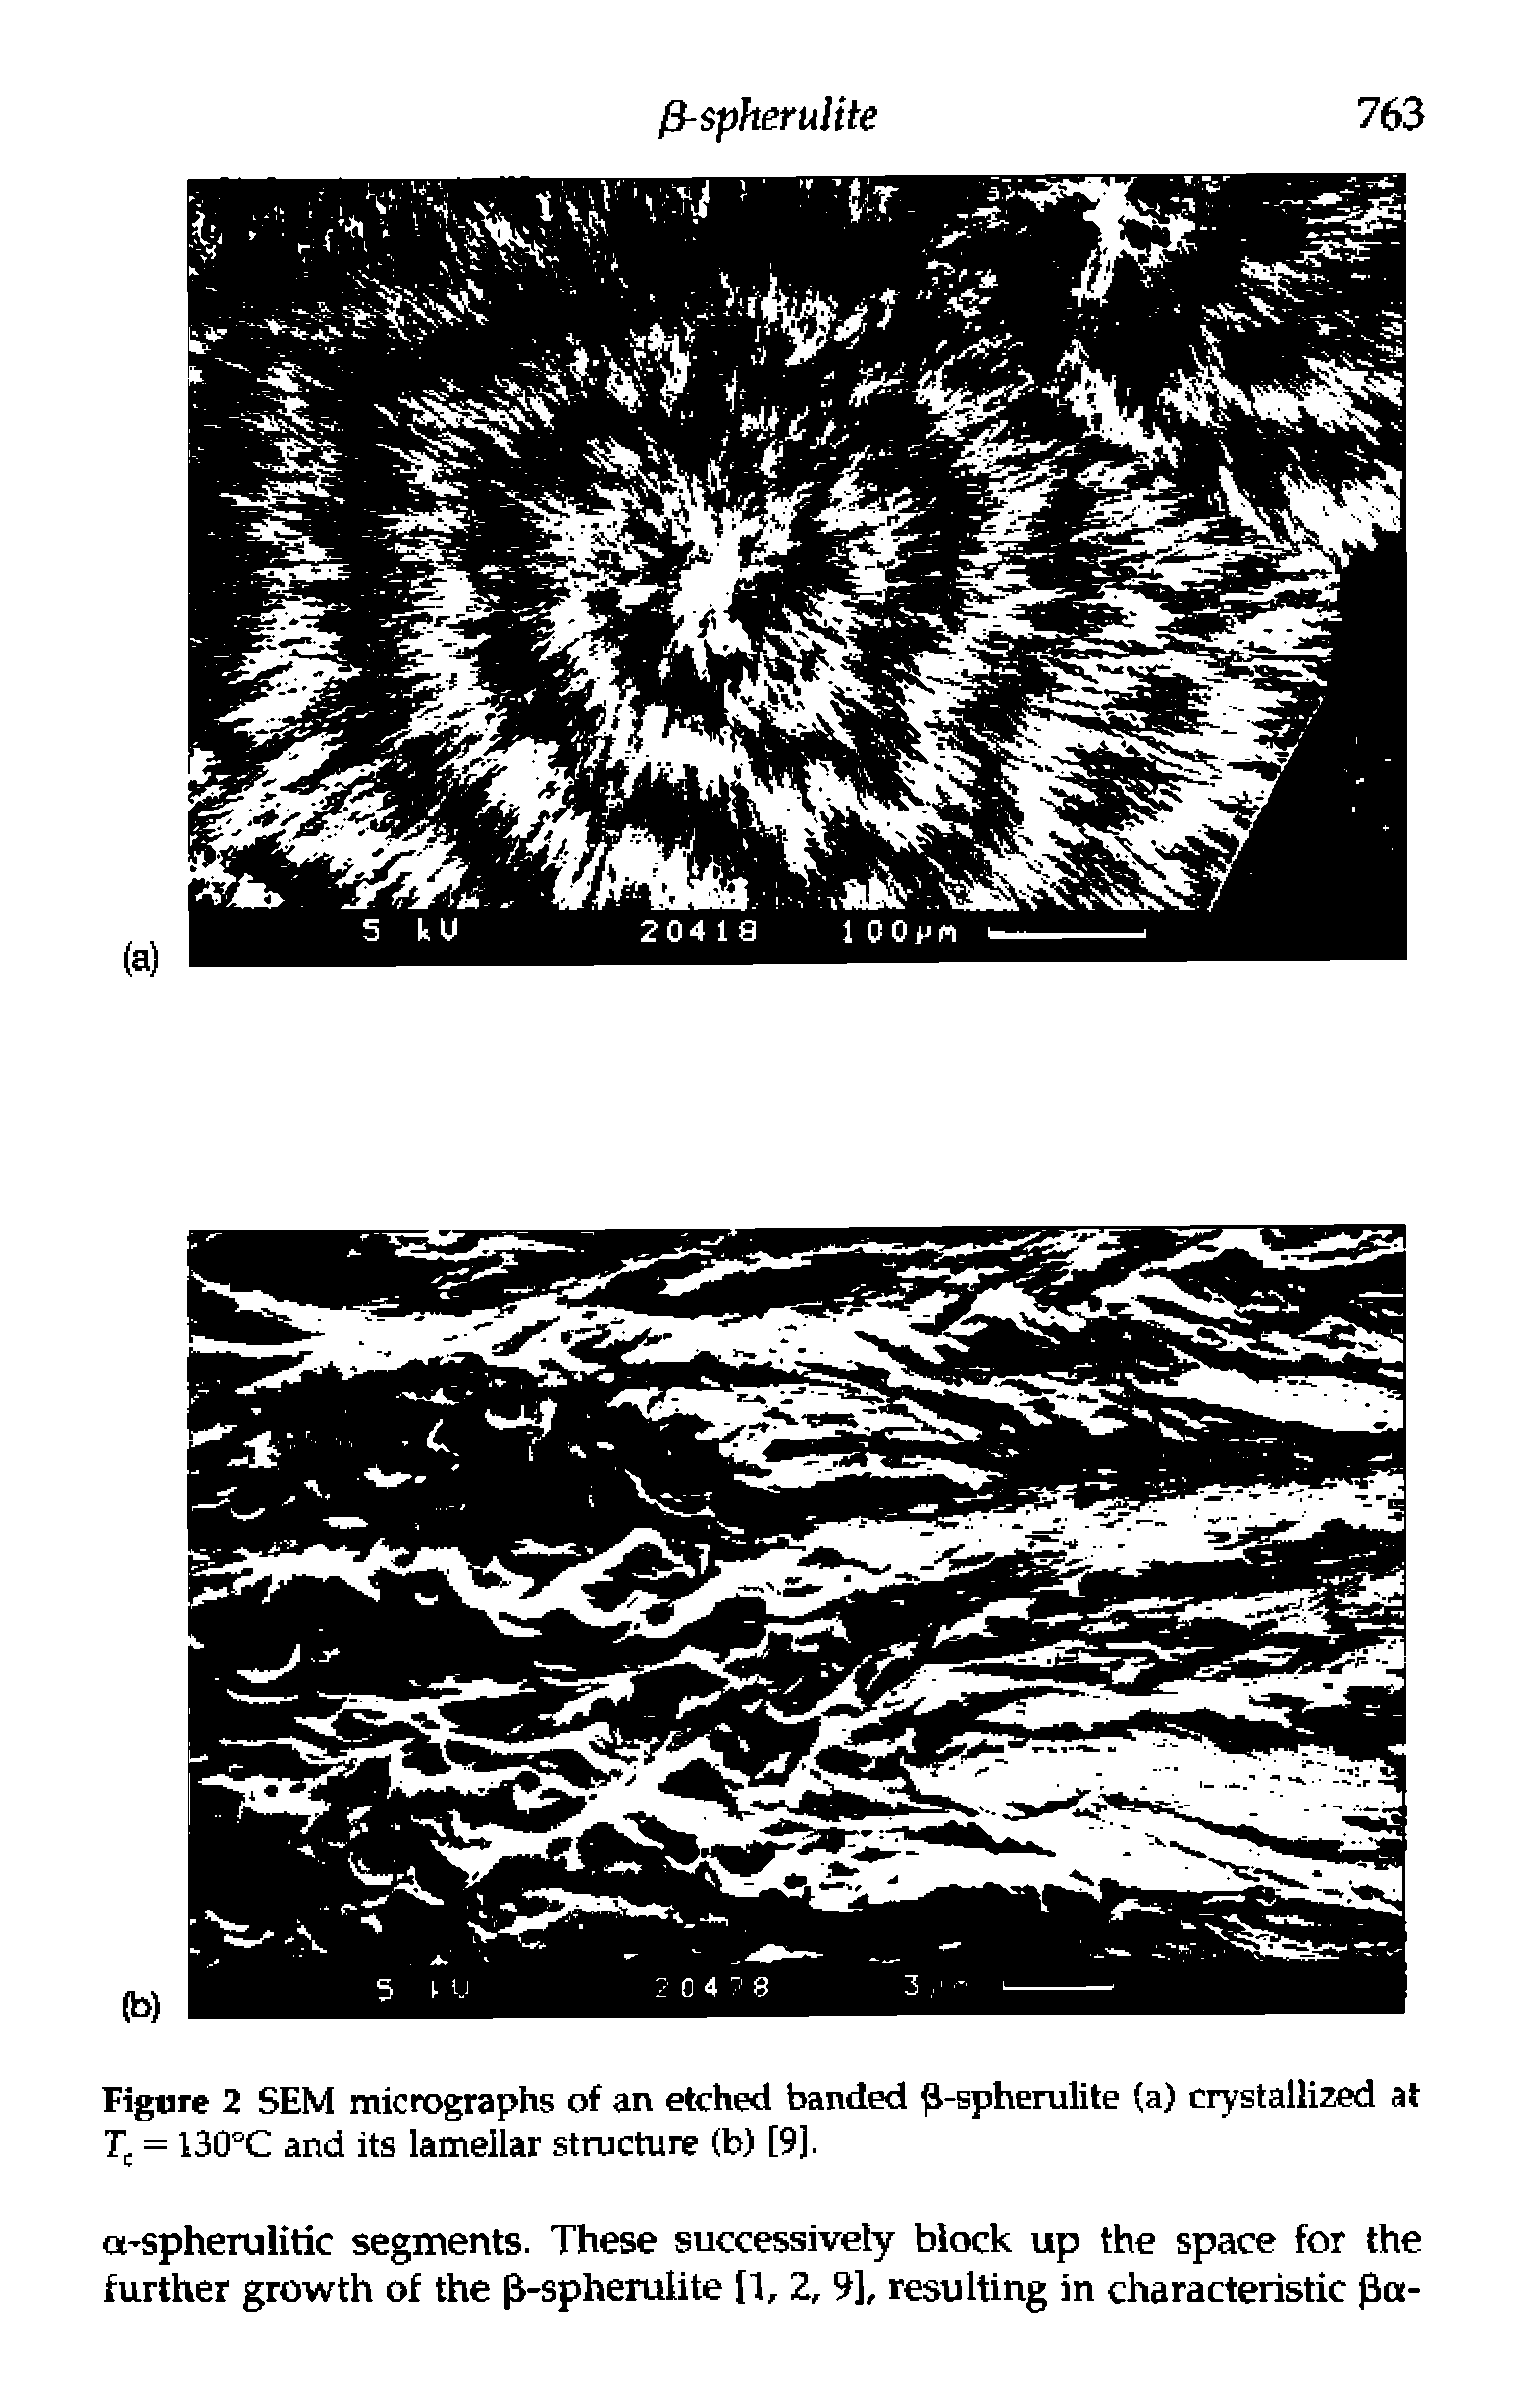 Figure 2 SEM micrographs of an etched banded -spherulite (a) crystallized at Tj = 130°C and its lamellar structure (b) [9).